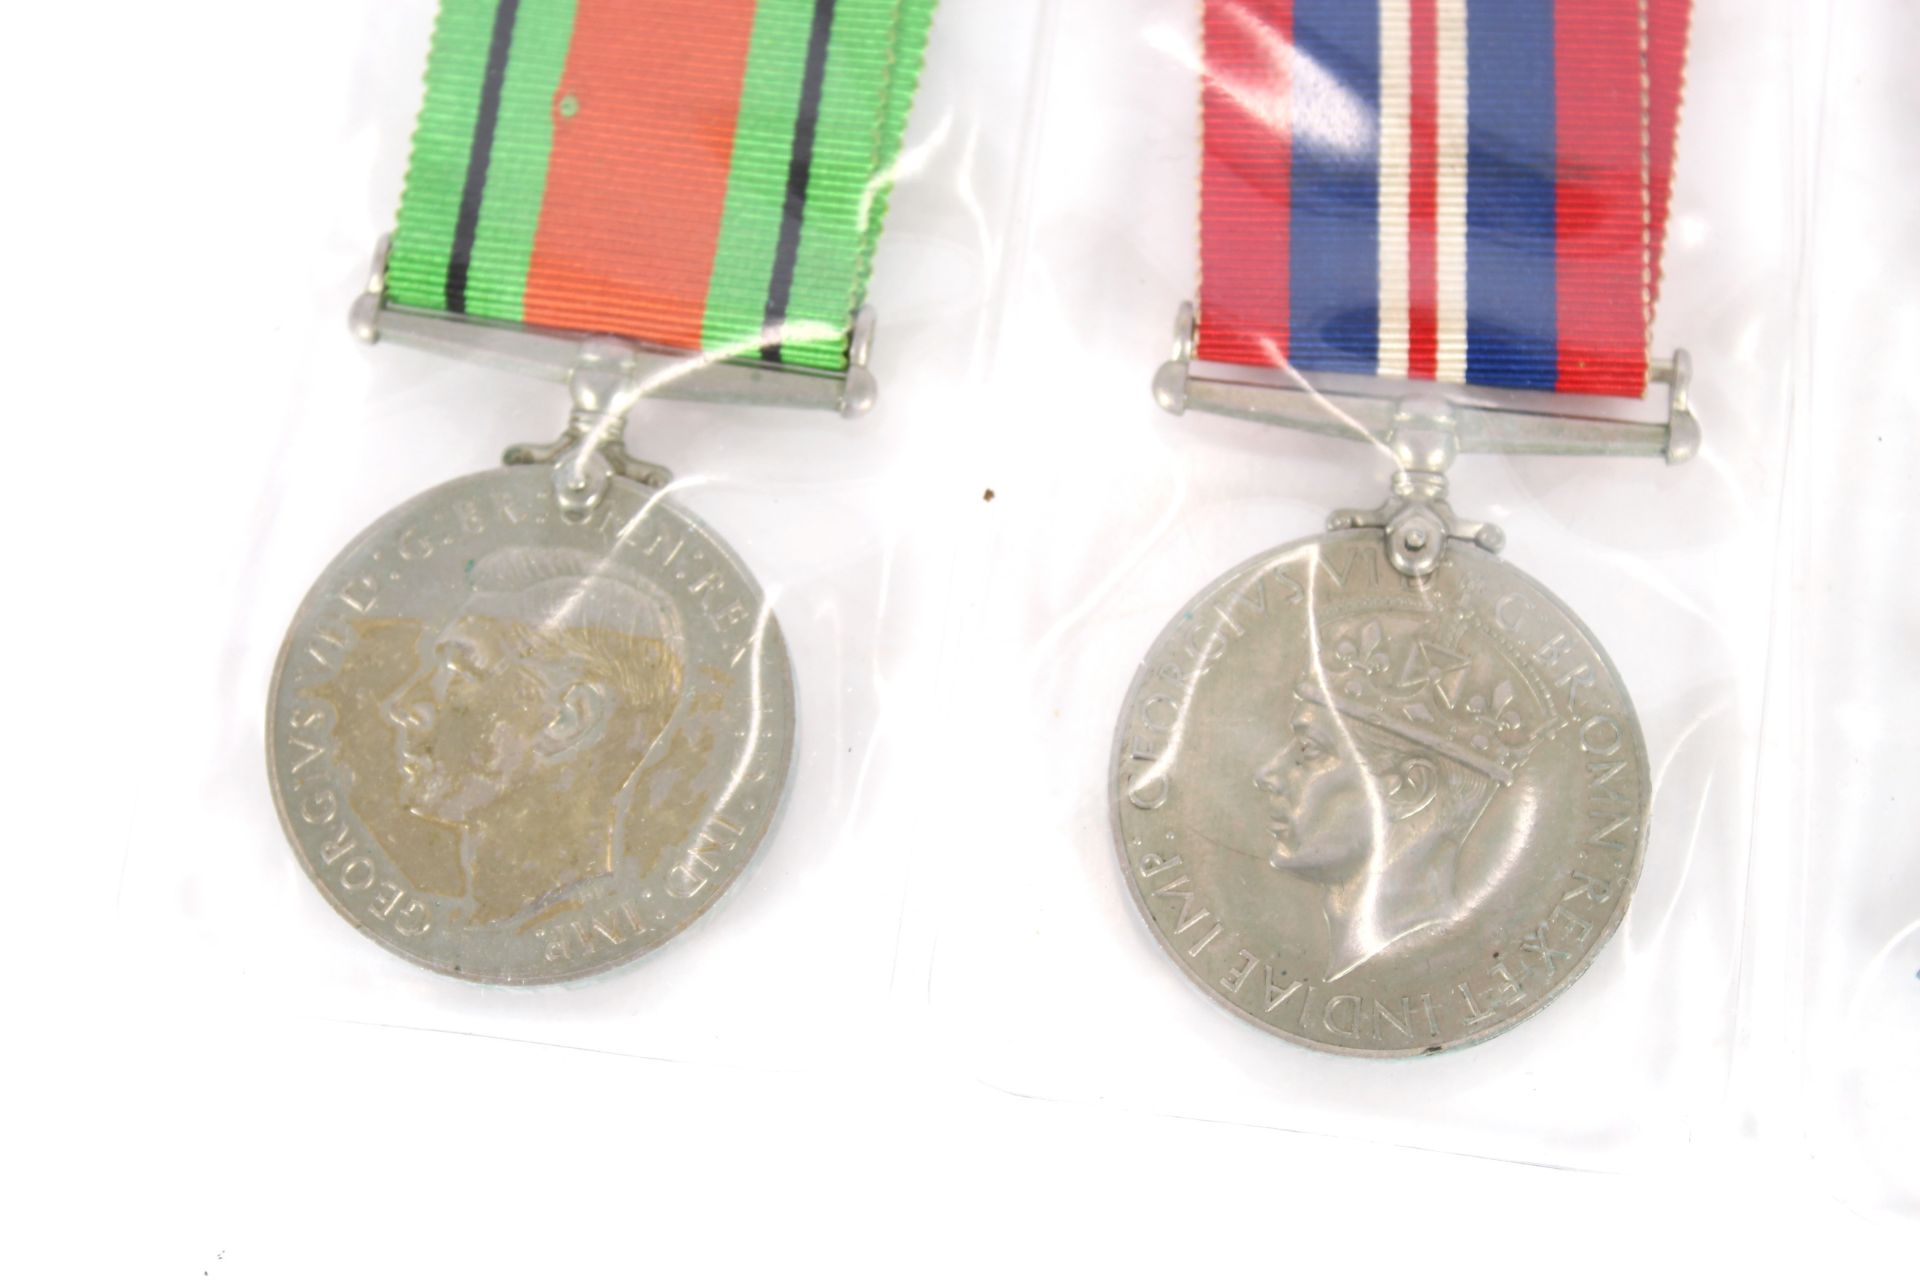 Six WWII medals including Italy and 39/45 Stars - Image 2 of 7